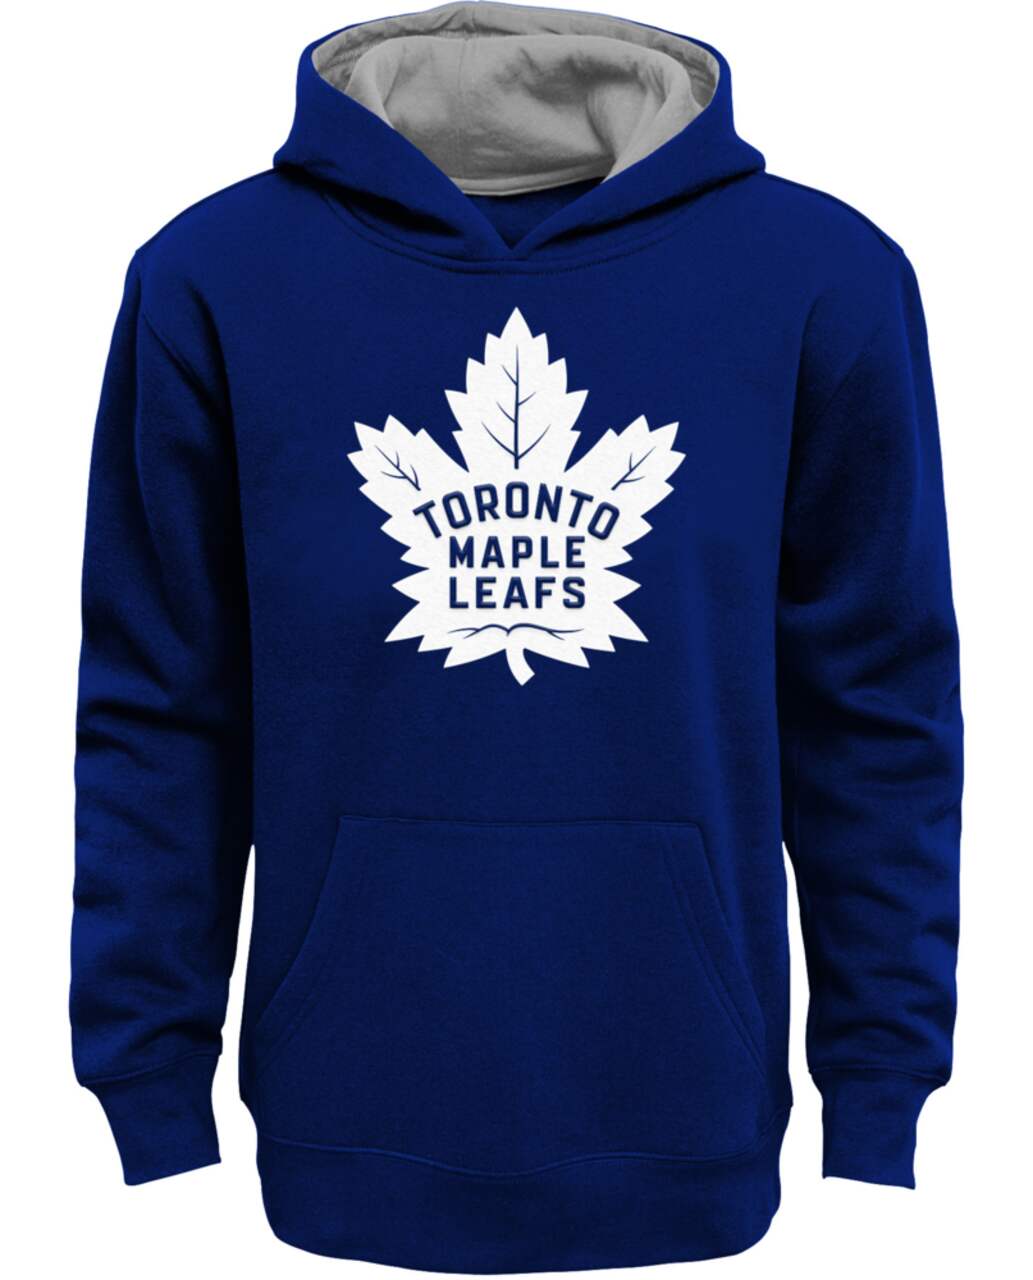 https://media-www.canadiantire.ca/product/playing/hockey/hockey-accessories/0838971/toronto-maple-leafs-hoody-youth-small-d5704583-7237-4b62-882d-7f9e5ed1f641.png?imdensity=1&imwidth=640&impolicy=mZoom